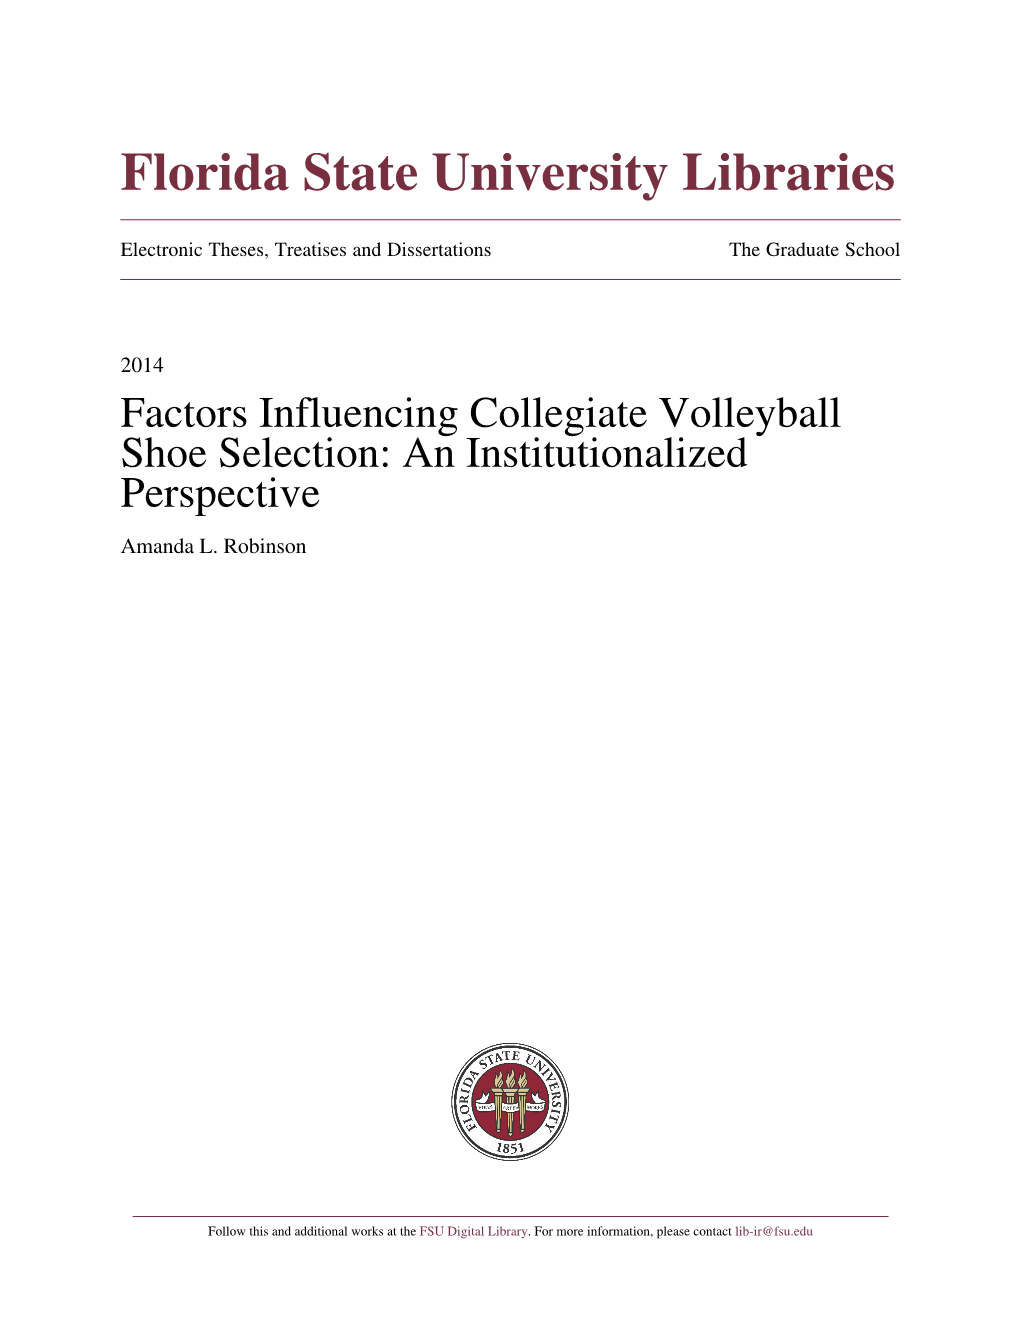 Factors Influencing Collegiate Volleyball Shoe Selection: an Institutionalized Perspective Amanda L